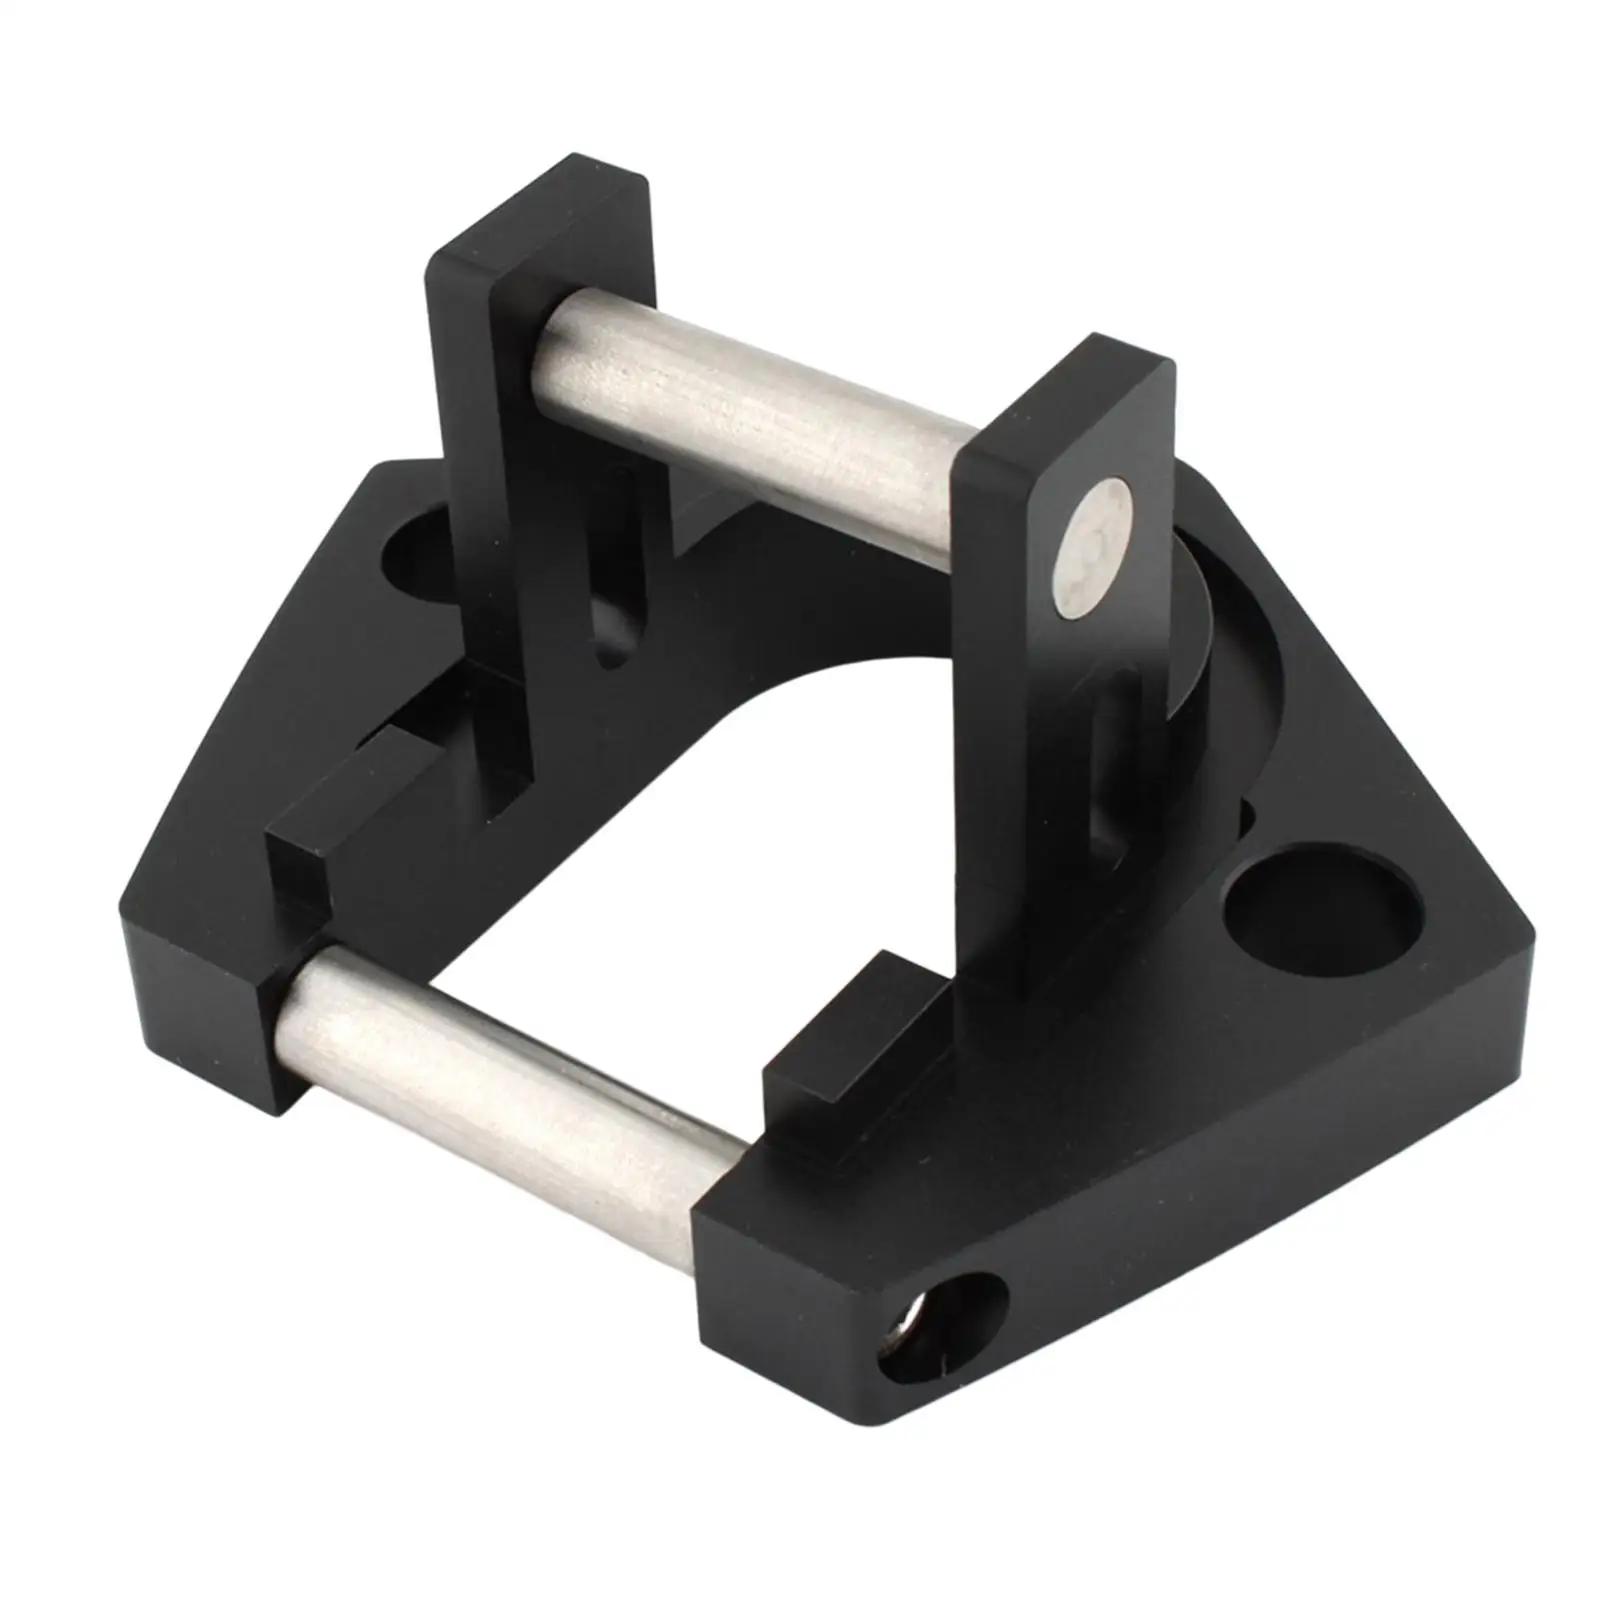 Bottom Mounting Bracket Foot Assembly for Sunchaser II Solid Aluminum